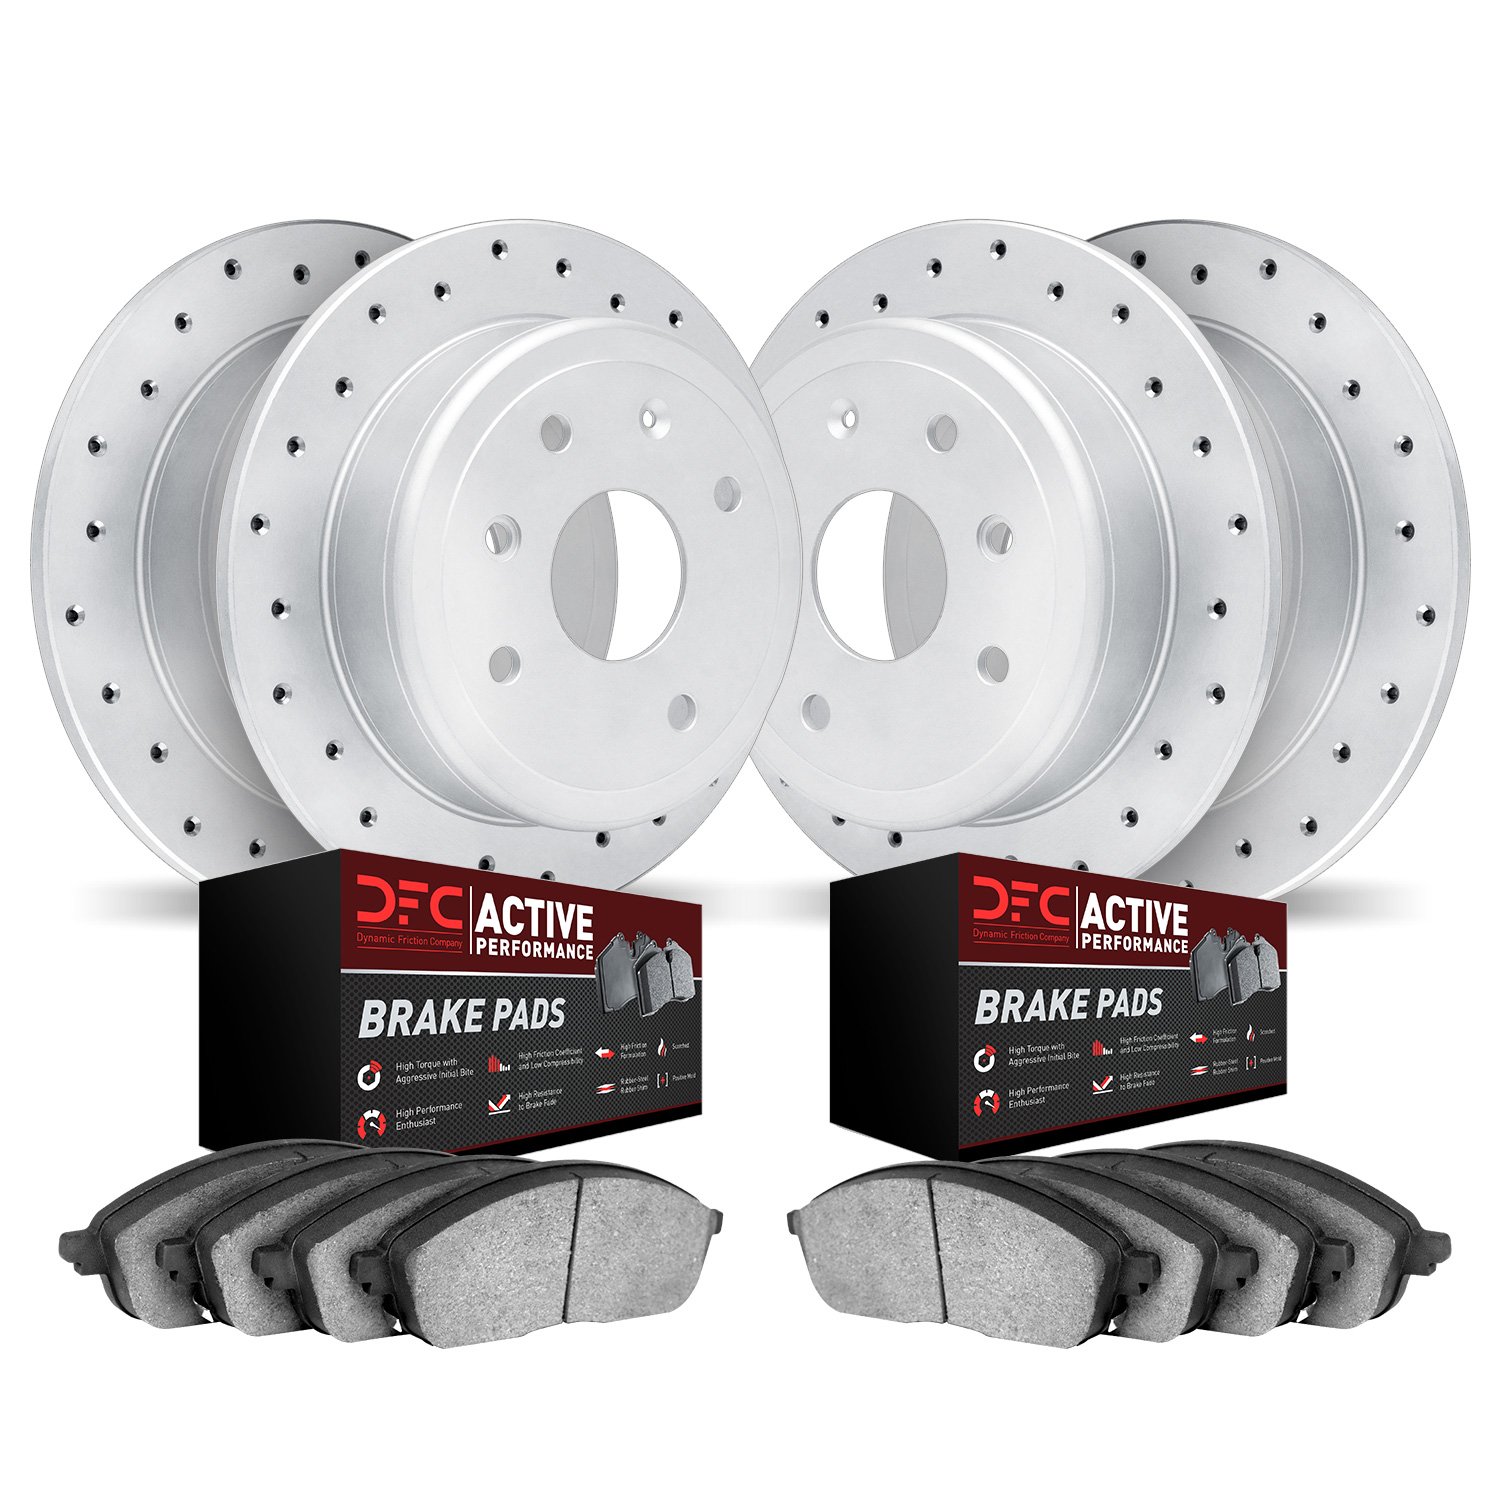 2704-76006 Geoperformance Drilled Brake Rotors with Active Performance Pads Kit, 2000-2005 Lexus/Toyota/Scion, Position: Front a